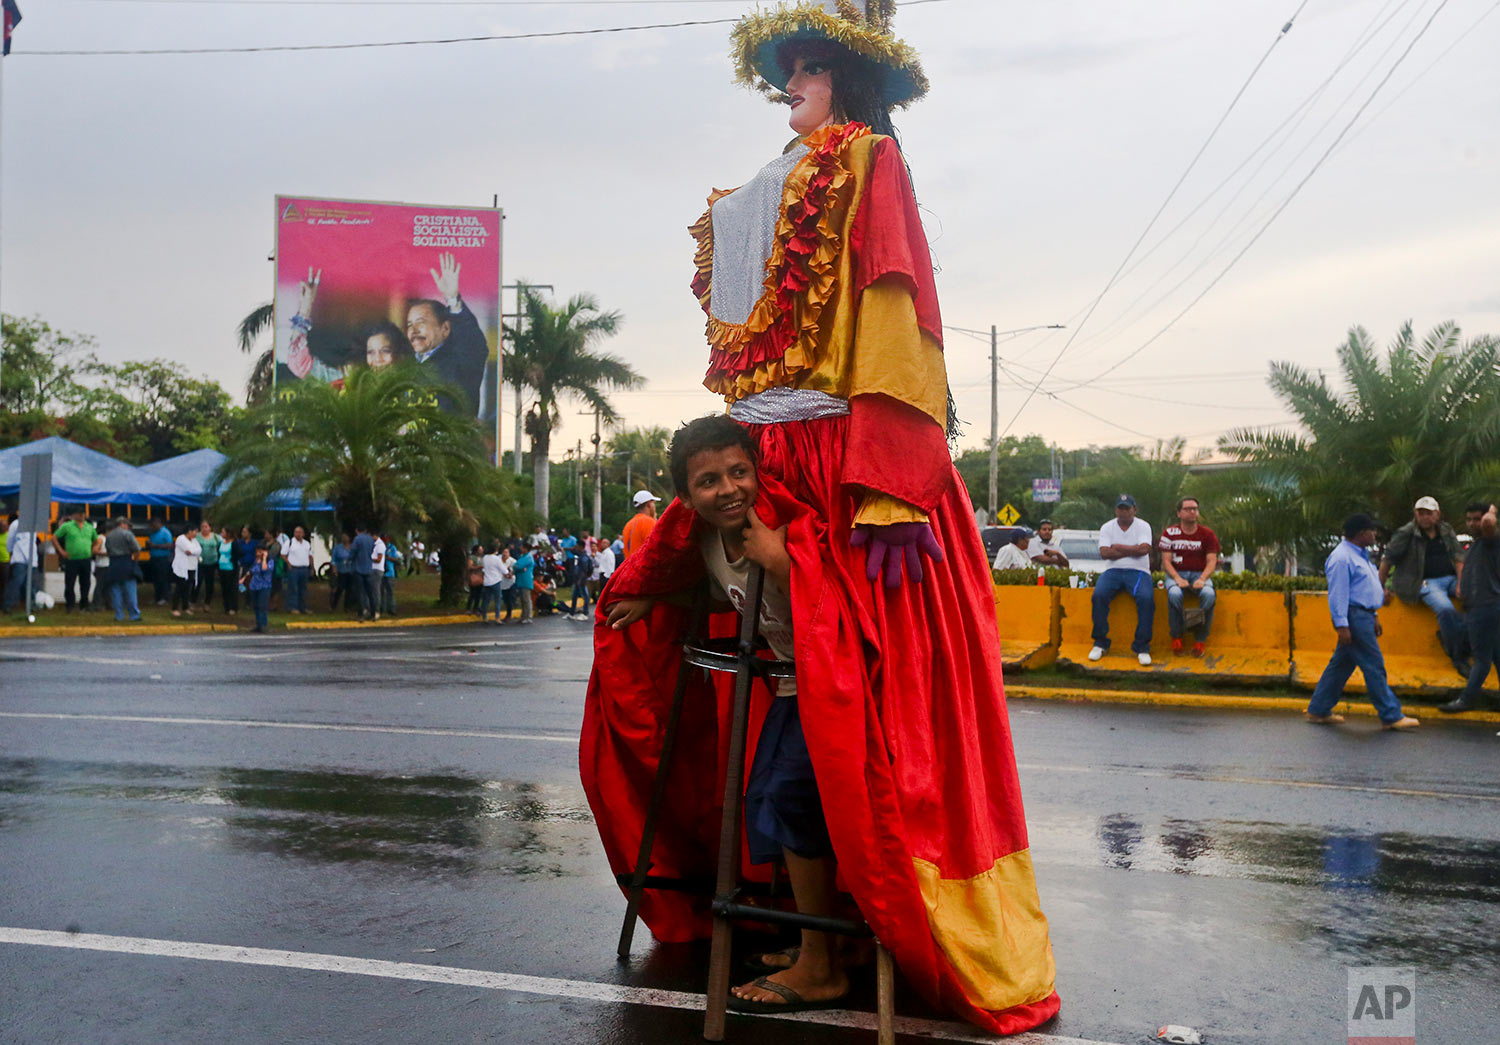  In this May 22, 2018 photo, a youth peers from under a large doll coined "La Gigantona," or The Gigantic, during a pro-government event in Managua, Nicaragua, where a billboard stands behind of President Daniel Ortega and his wife, Vice President Ro